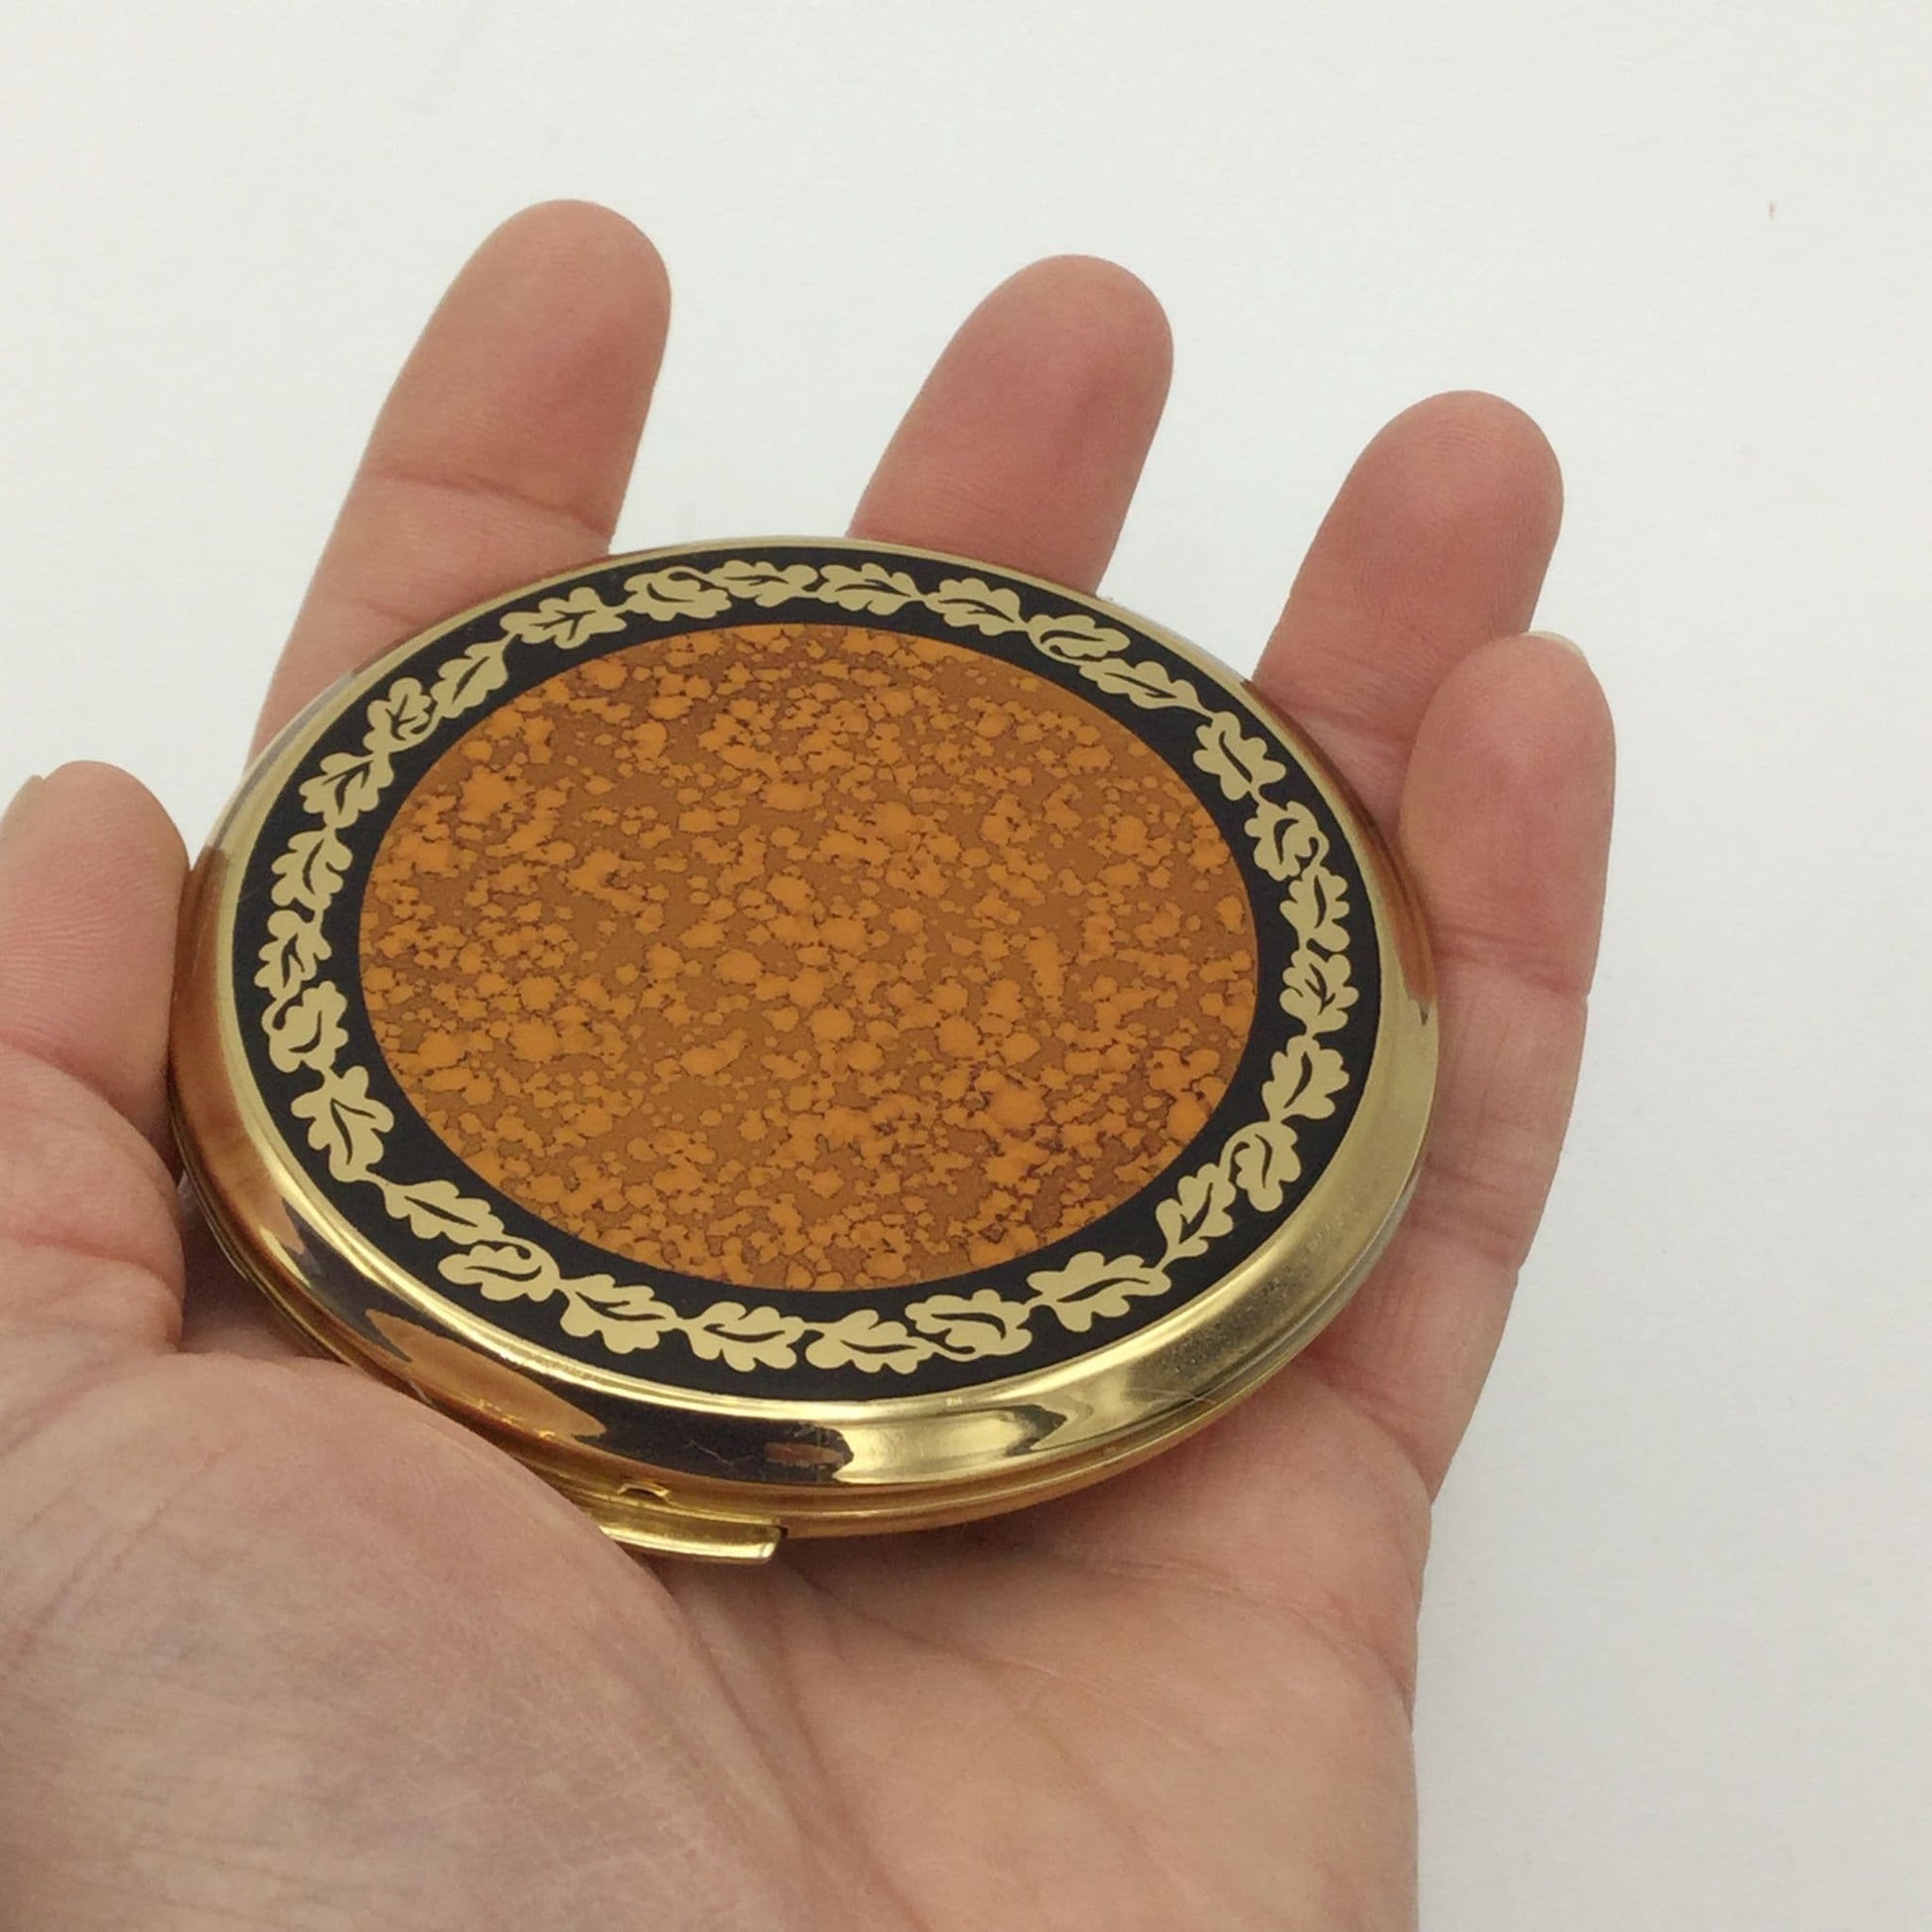 Bright 1990s vintage Stratton compact in a hand with an orange and brown enamel